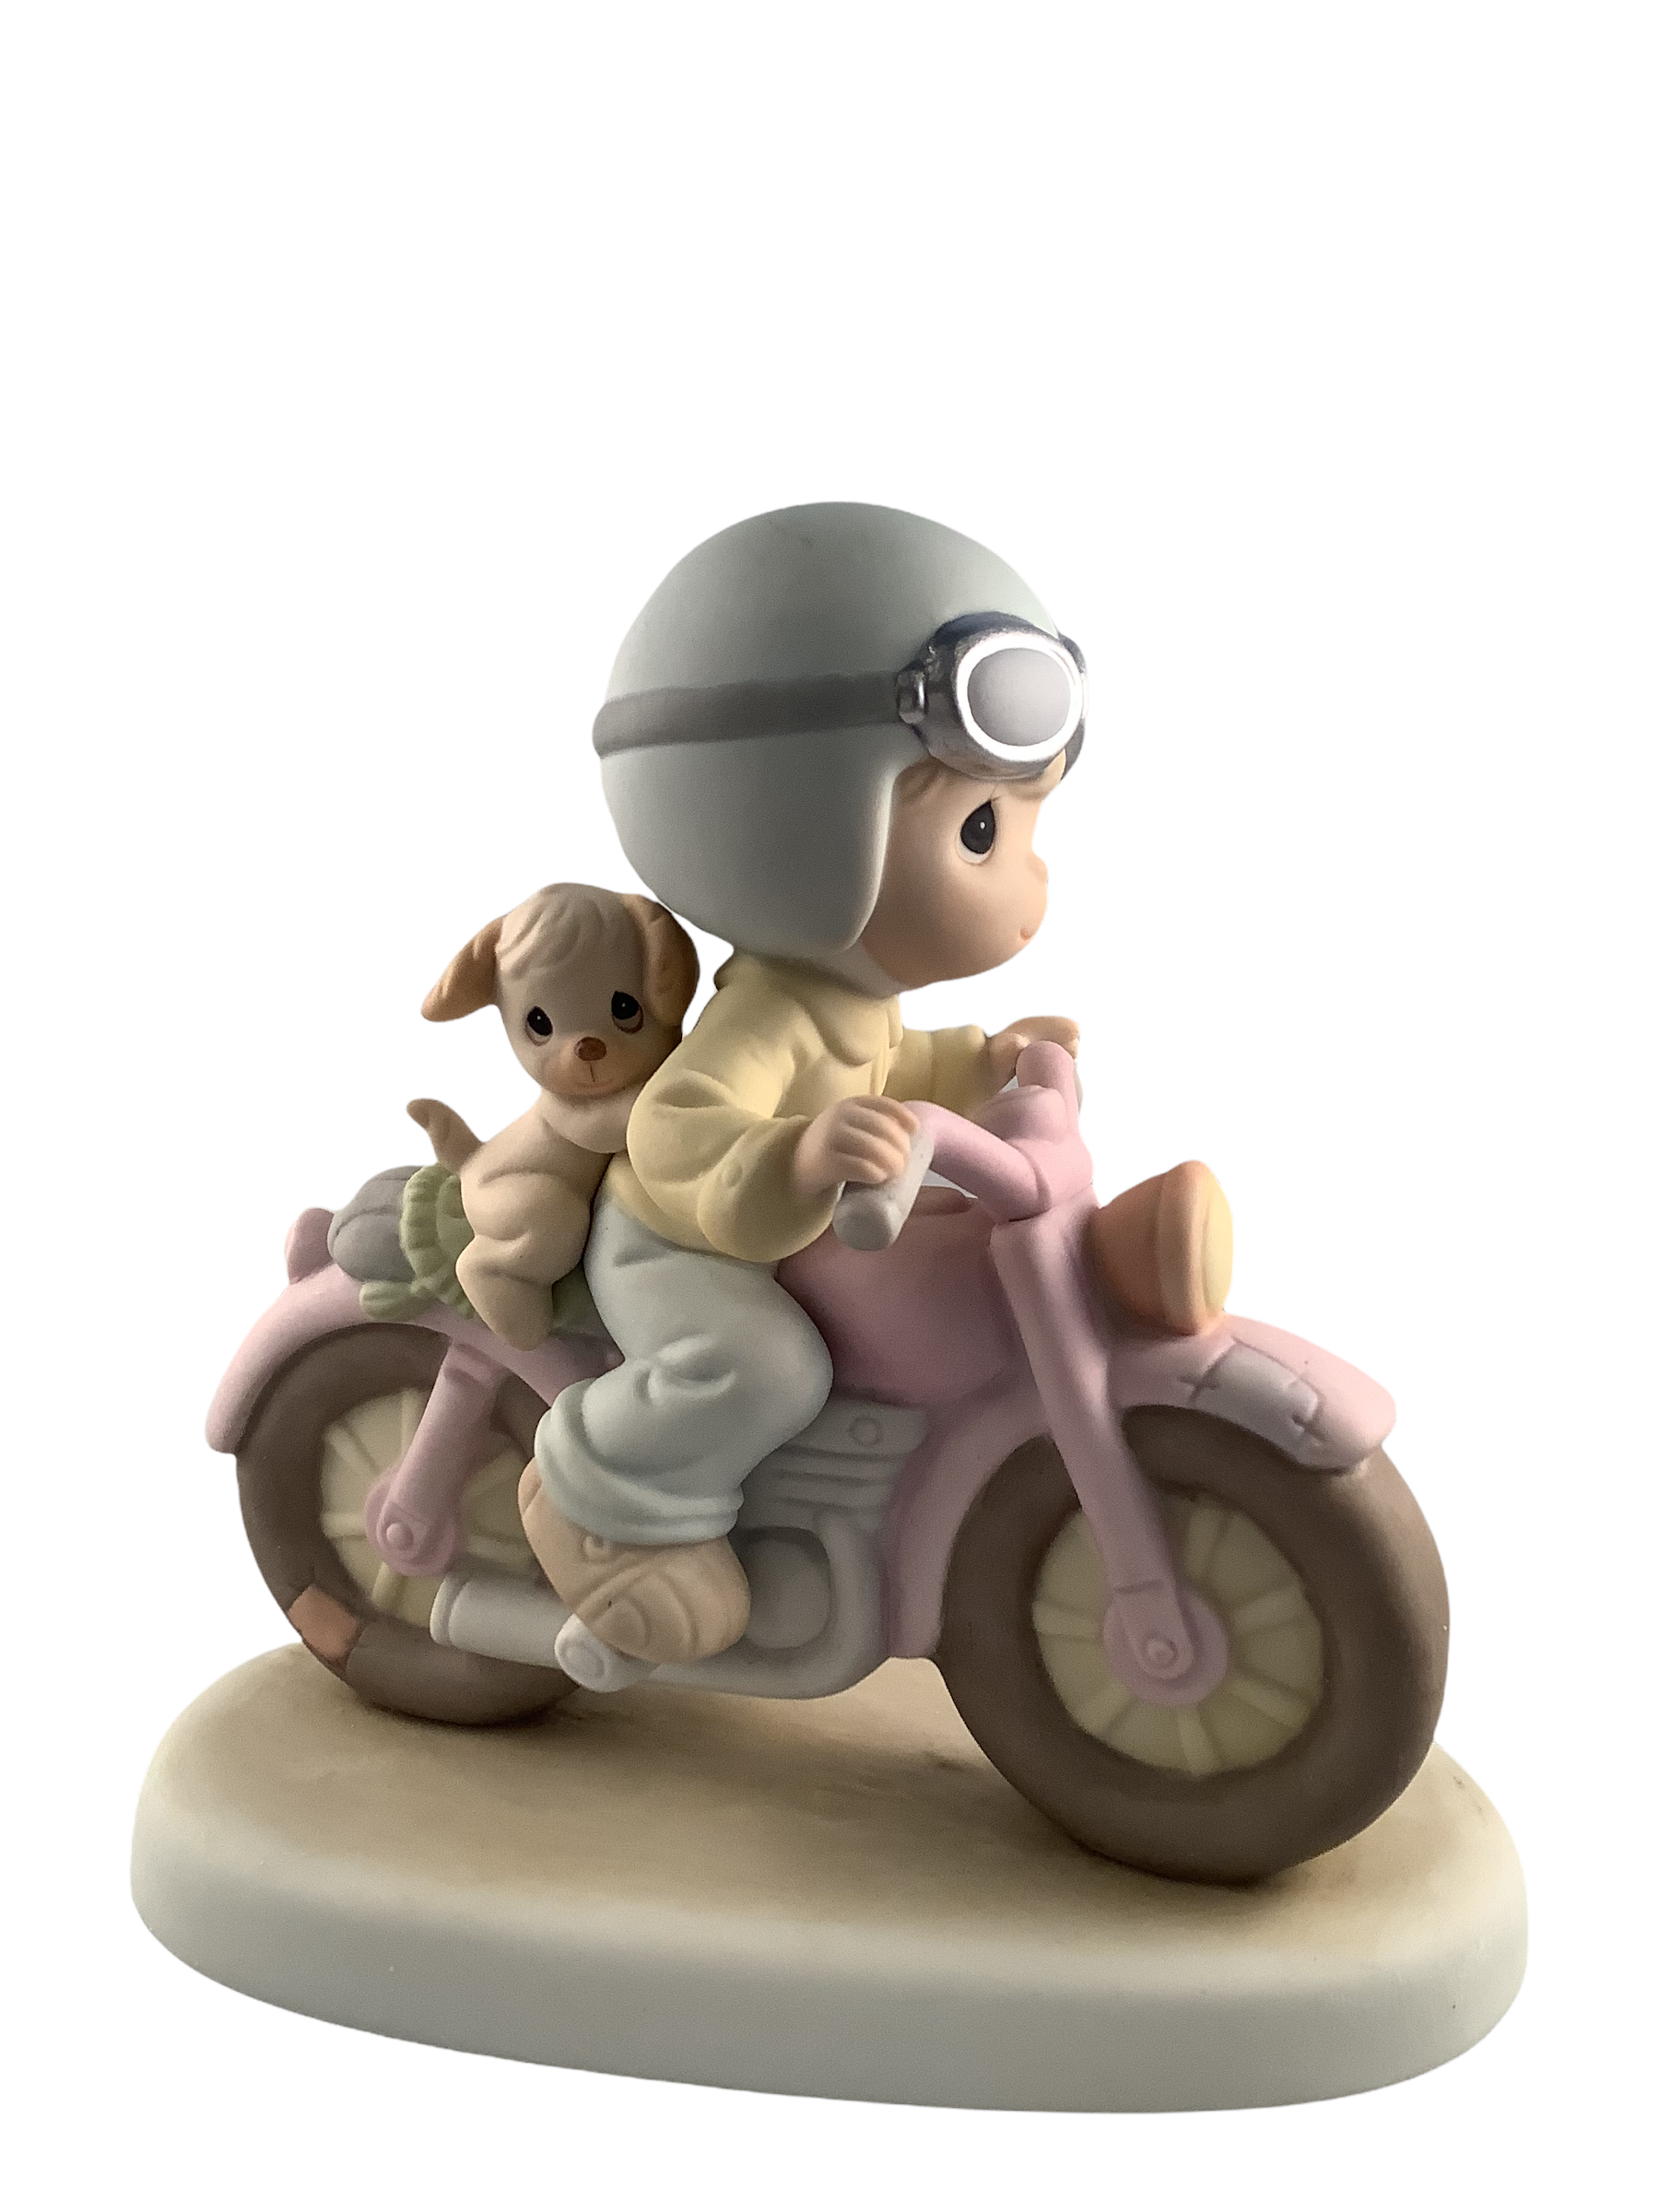 Our Friendship Goes A long Way - Precious Moment Figurine